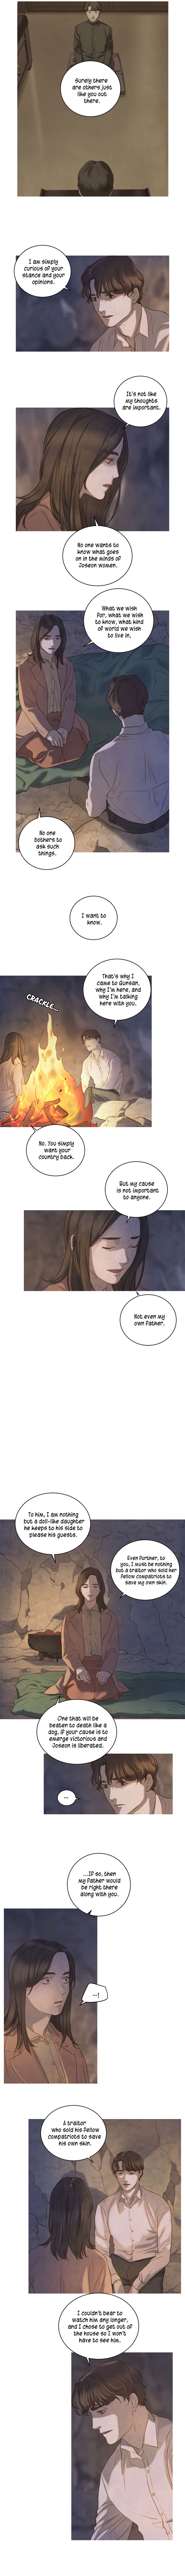 Gorae Byul - The Gyeongseong Mermaid - Chapter 5 Page 8